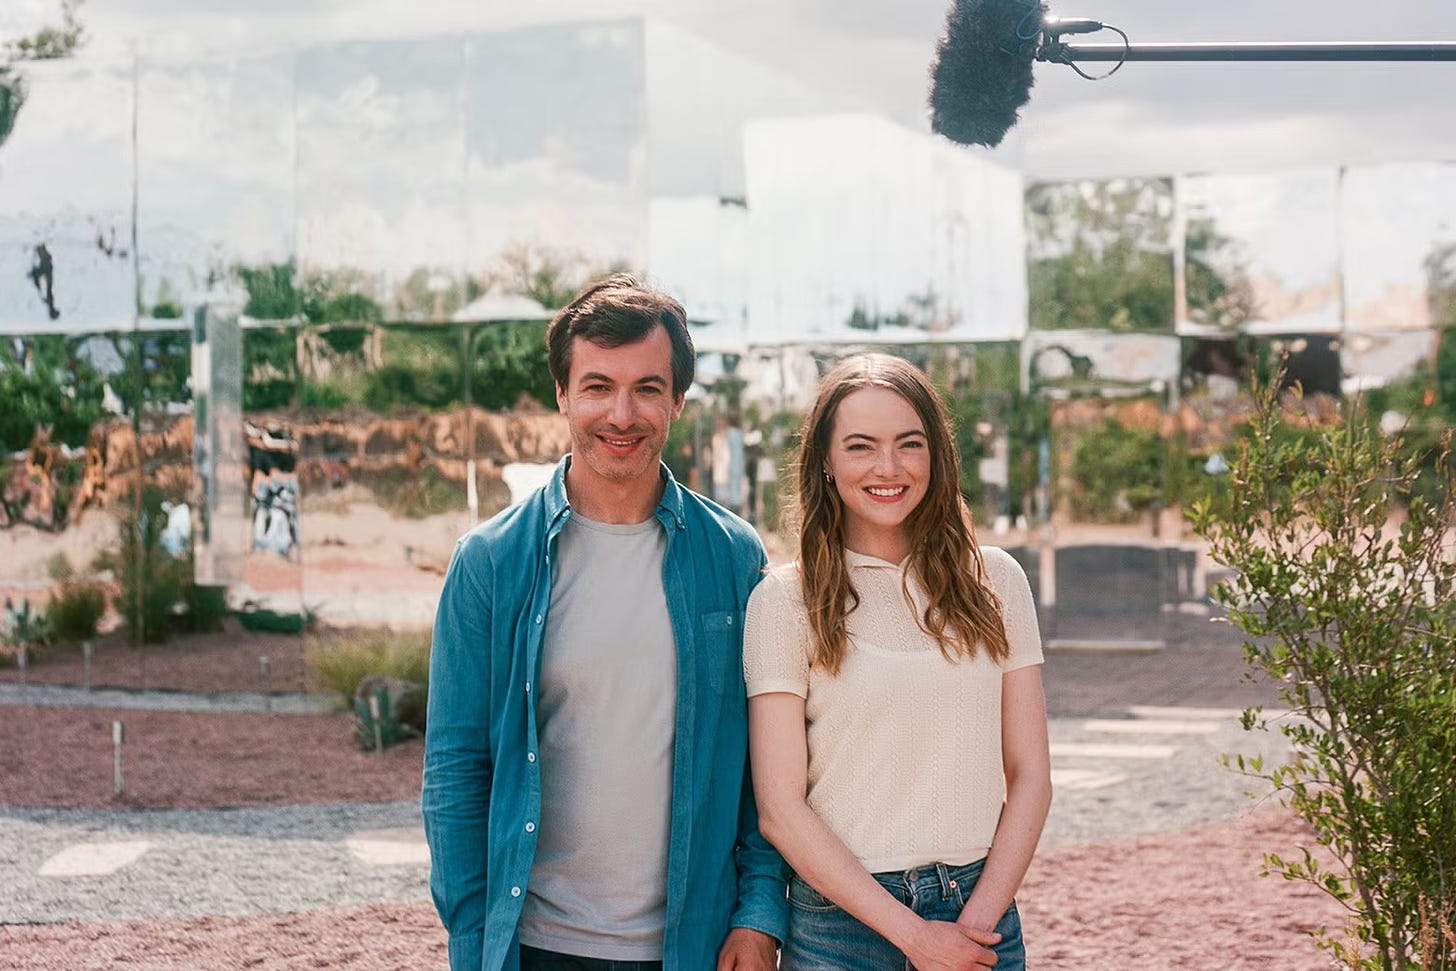 Nathan Fielder as Asher Siegel and Emma Stone as Whitney Siegel in The Curse